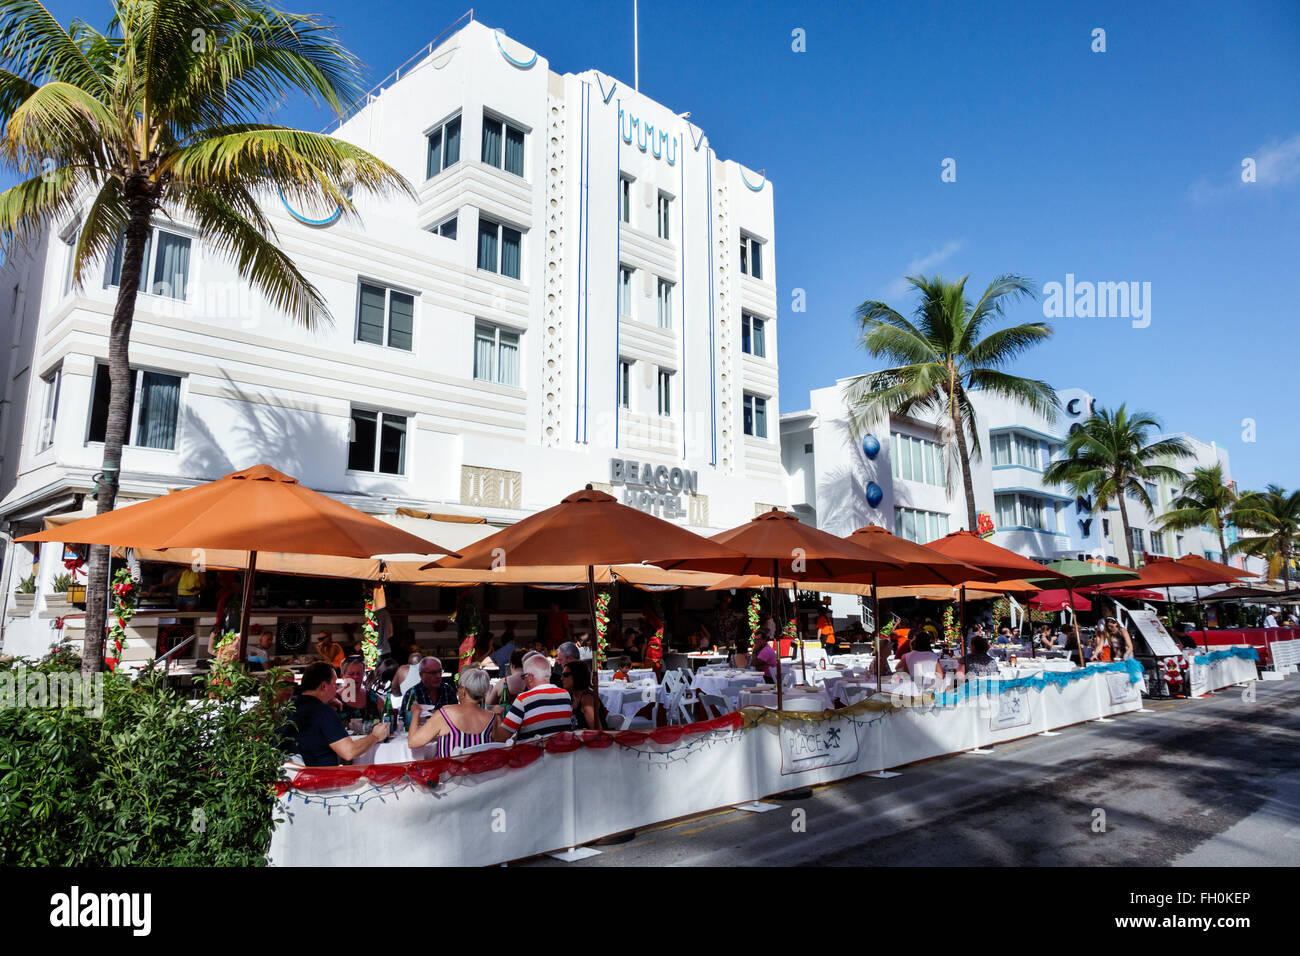 Miami Beach Florida,Ocean Drive,New Year's Day,hotel,lodging,hotels,restaurant restaurants food dining cafe cafes,al fresco sidewalk outside tables,Be Stock Photo